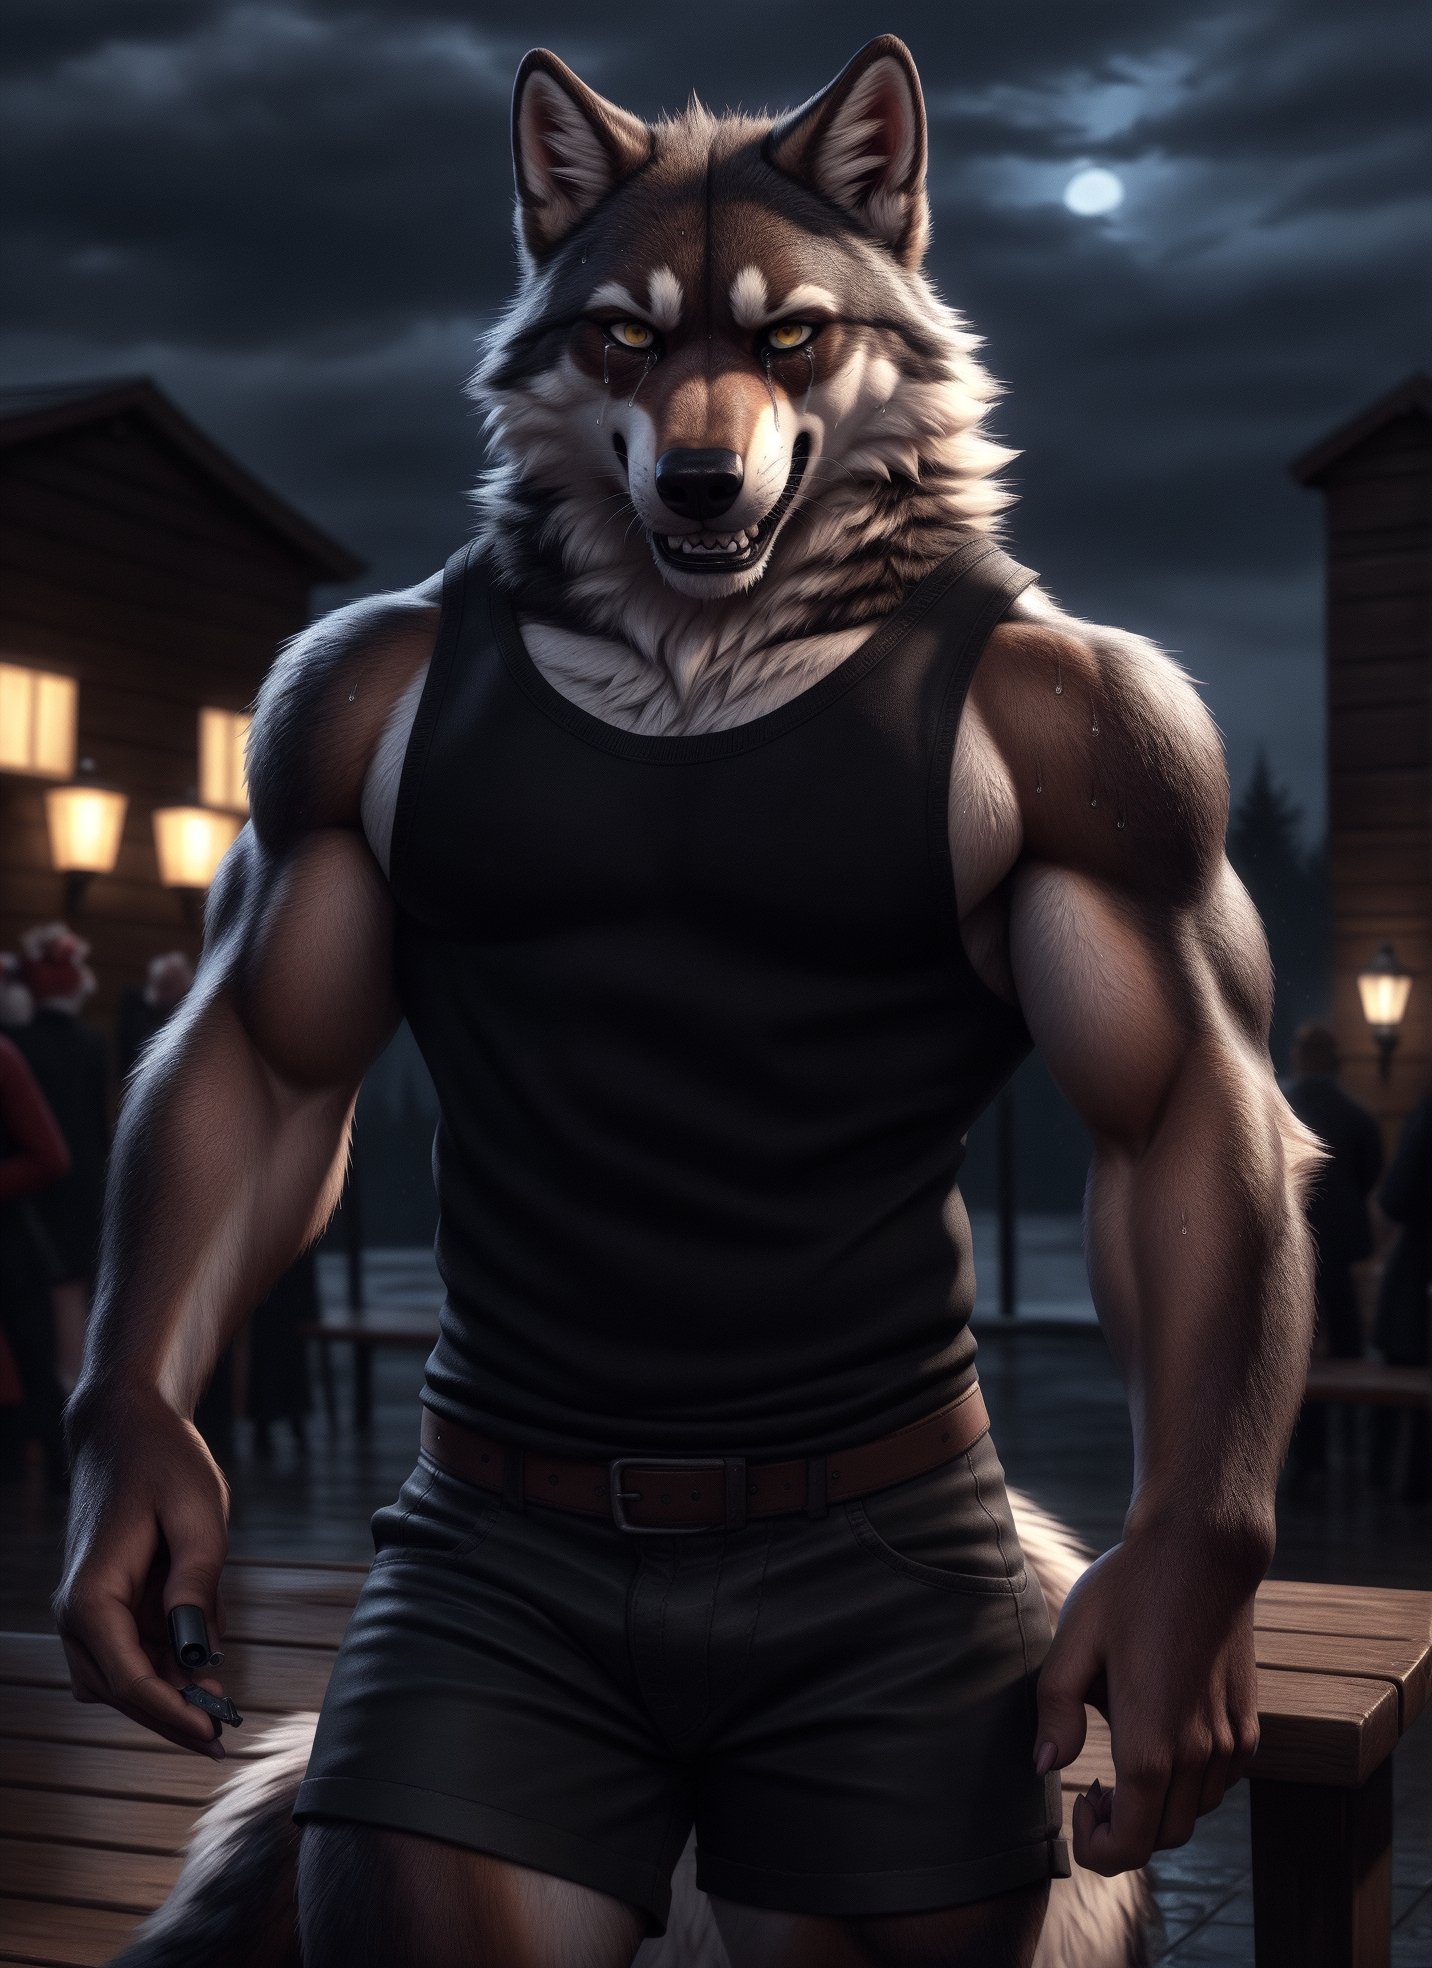 sad, depressed, realistic, anthropomorphic, muscular, anthro wolf with tail, yellow eyes, furry tail furry, (by personalami:0.5), zcik, (soft shading), 4k, hi res, detailed eyes, 8k eyes, eyes focus, colorful eyes, sweat, long tails, muscular, handsome, tails shown, anthro males in the background shown clearly, depressed expression, bruises on arms, standing in front of bench, gripping hand gun in hand, suicidal thoughts, rain pouring down, eerie weather, tears from eyes, tank top, shorts, face blush, crying out in rage, baring teeth, open mouth, rage face